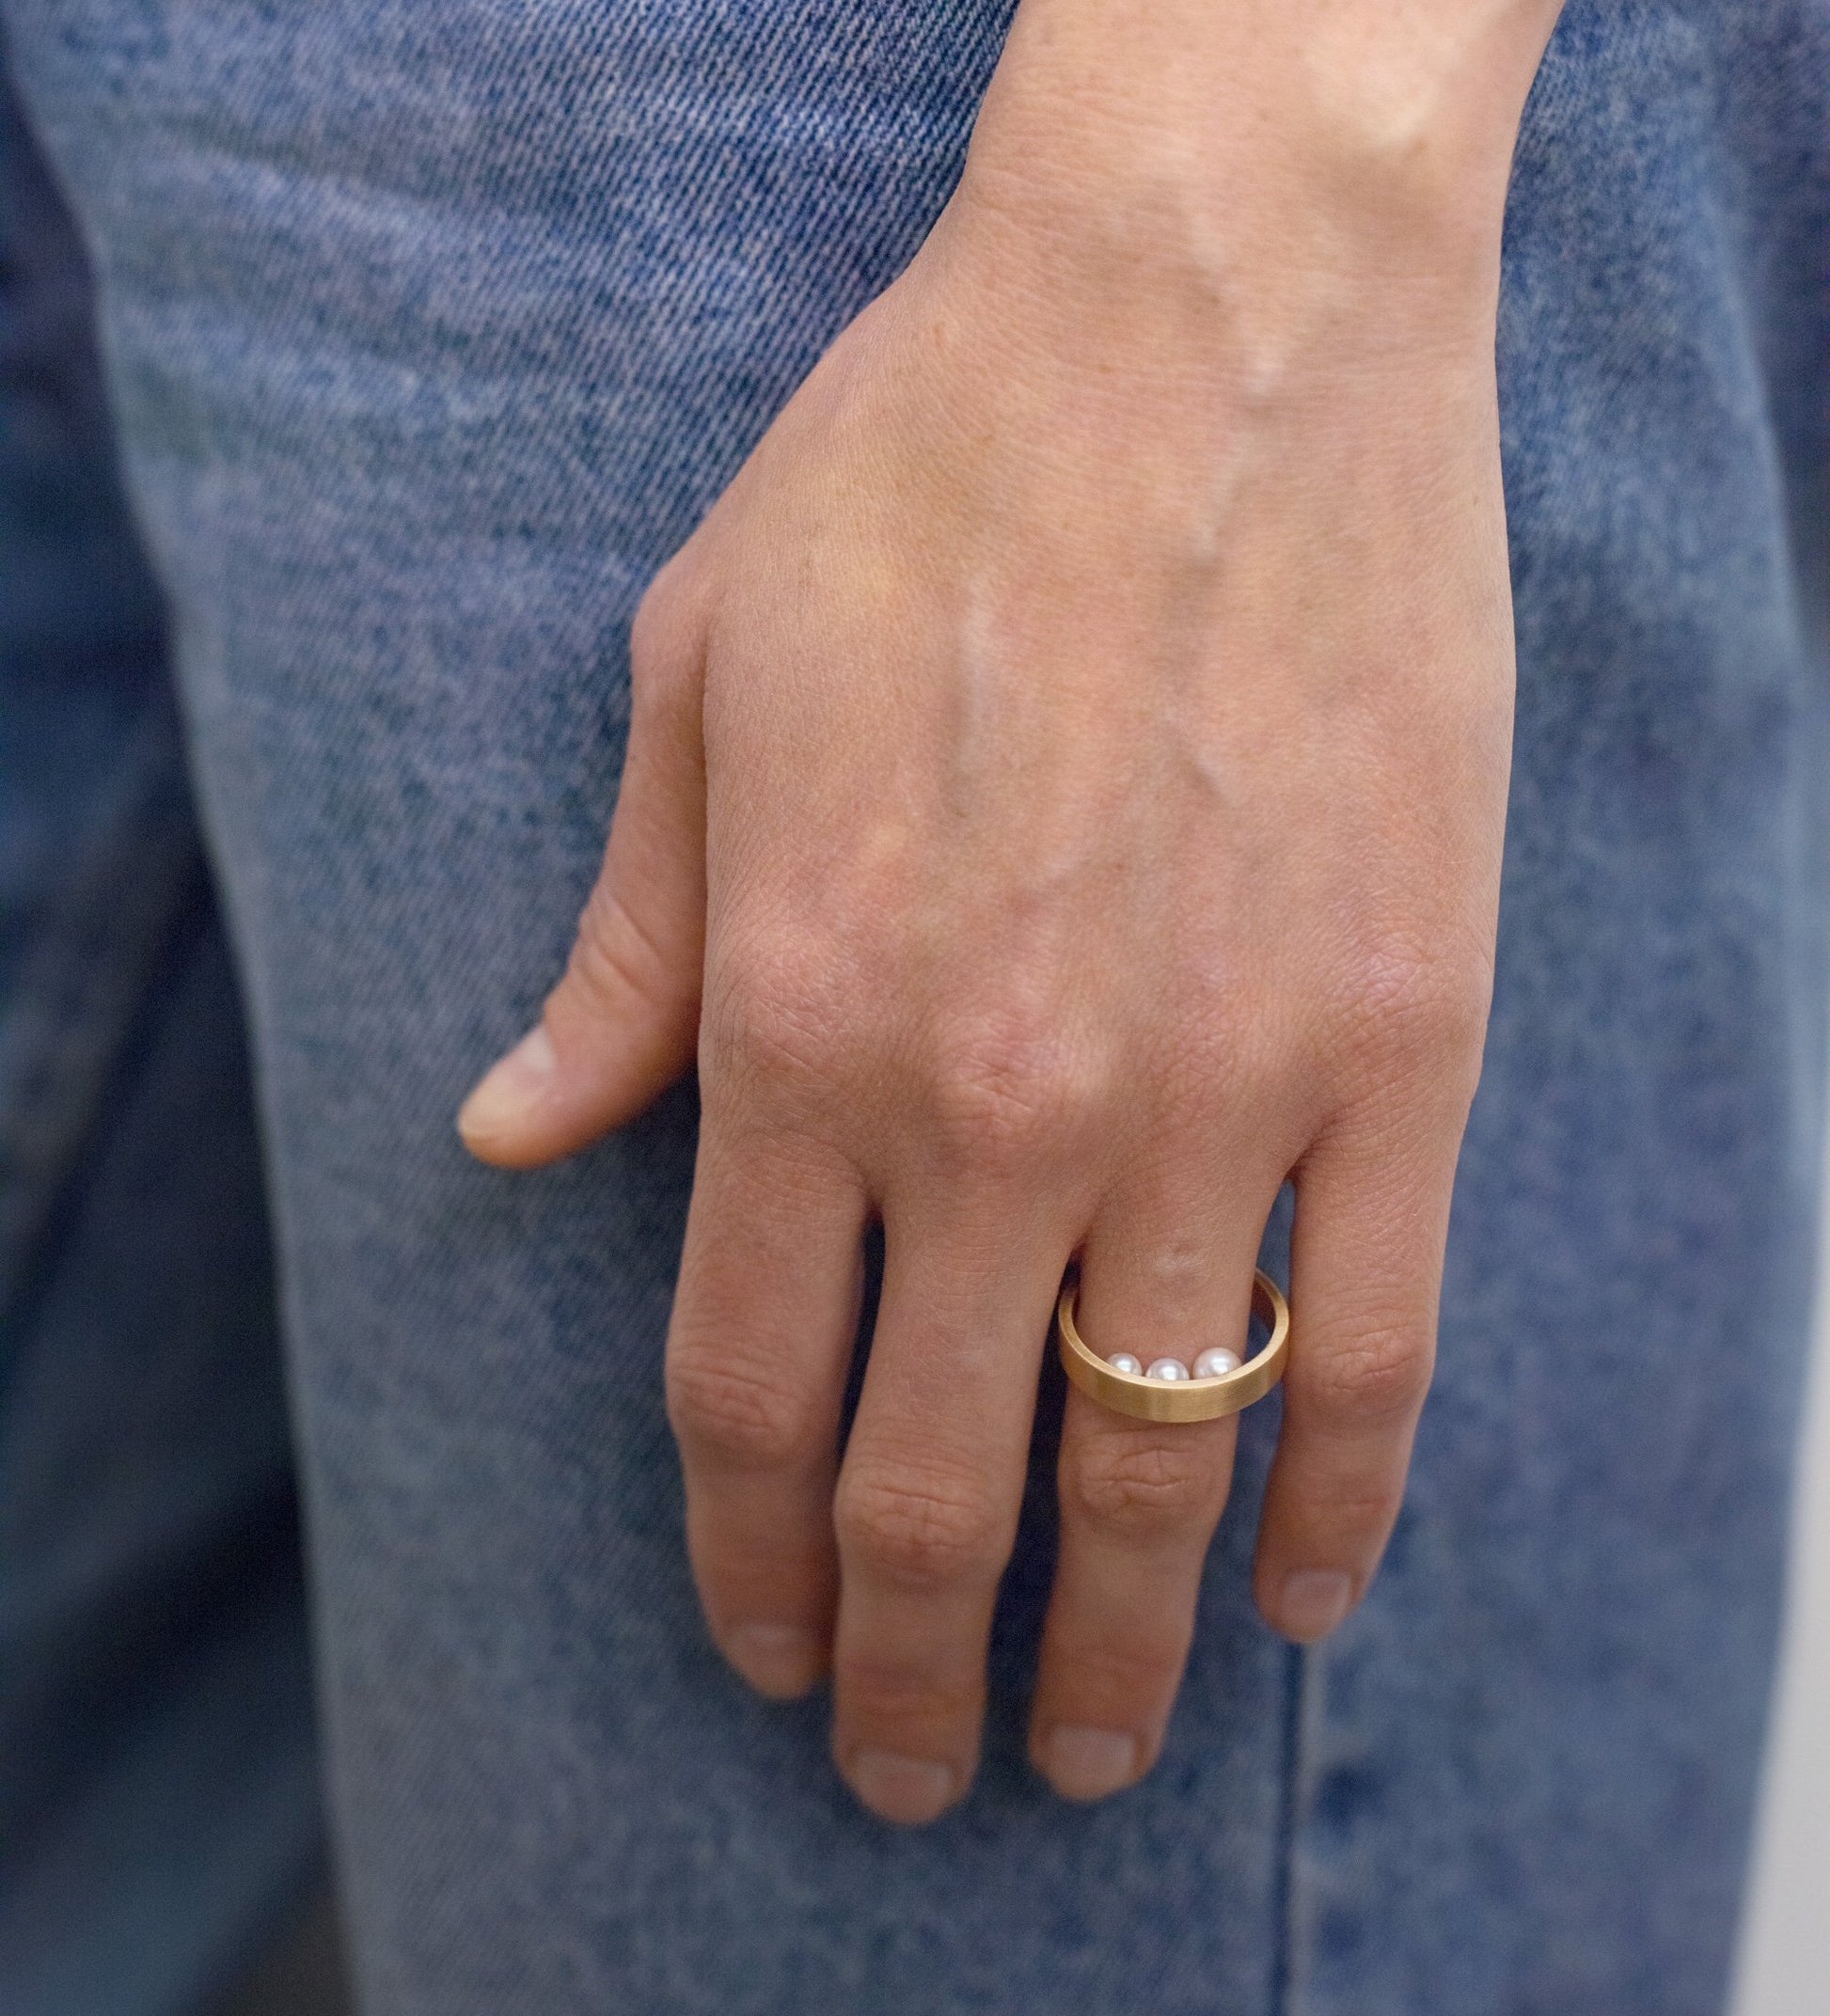 18KT yellow gold band ring with three hidden akoya pearls (diameter 3,7-4,5-5 MM) worn by female hand - Light R